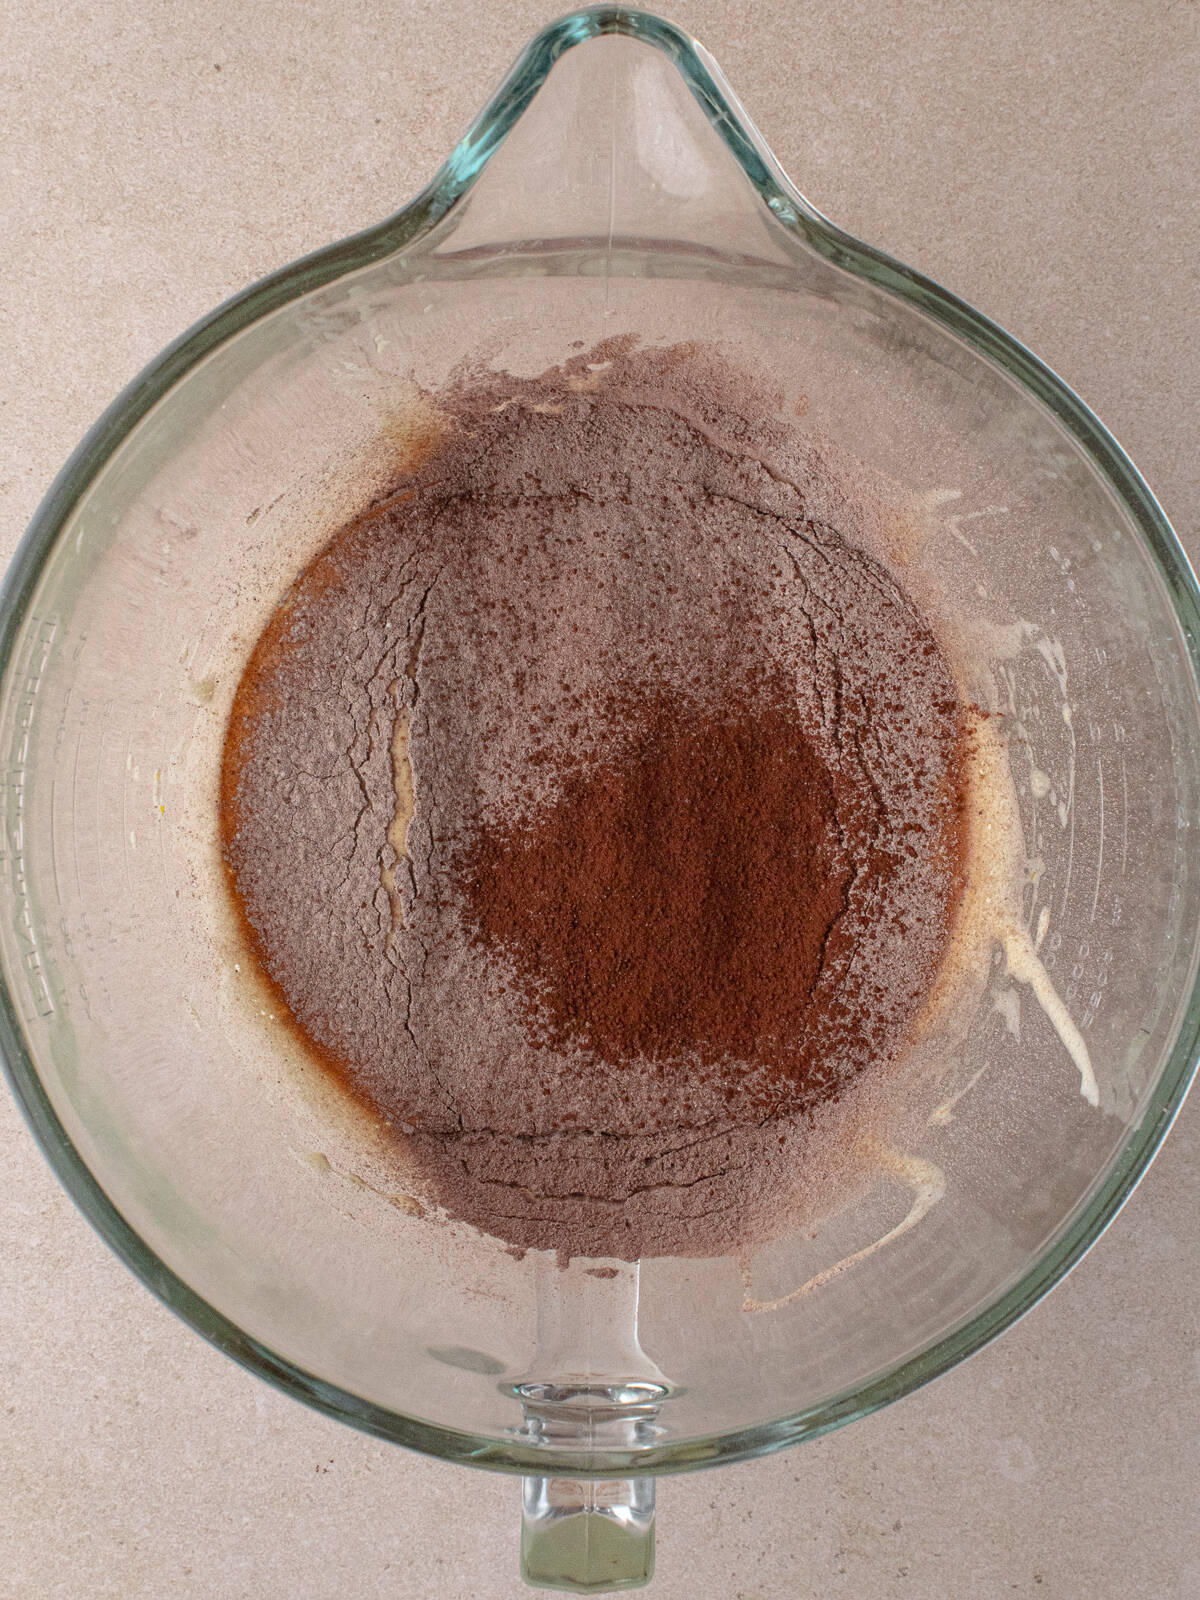 Sifted flour, cocoa powder, baking powder and salt added to whipped sugar and egg mixture.